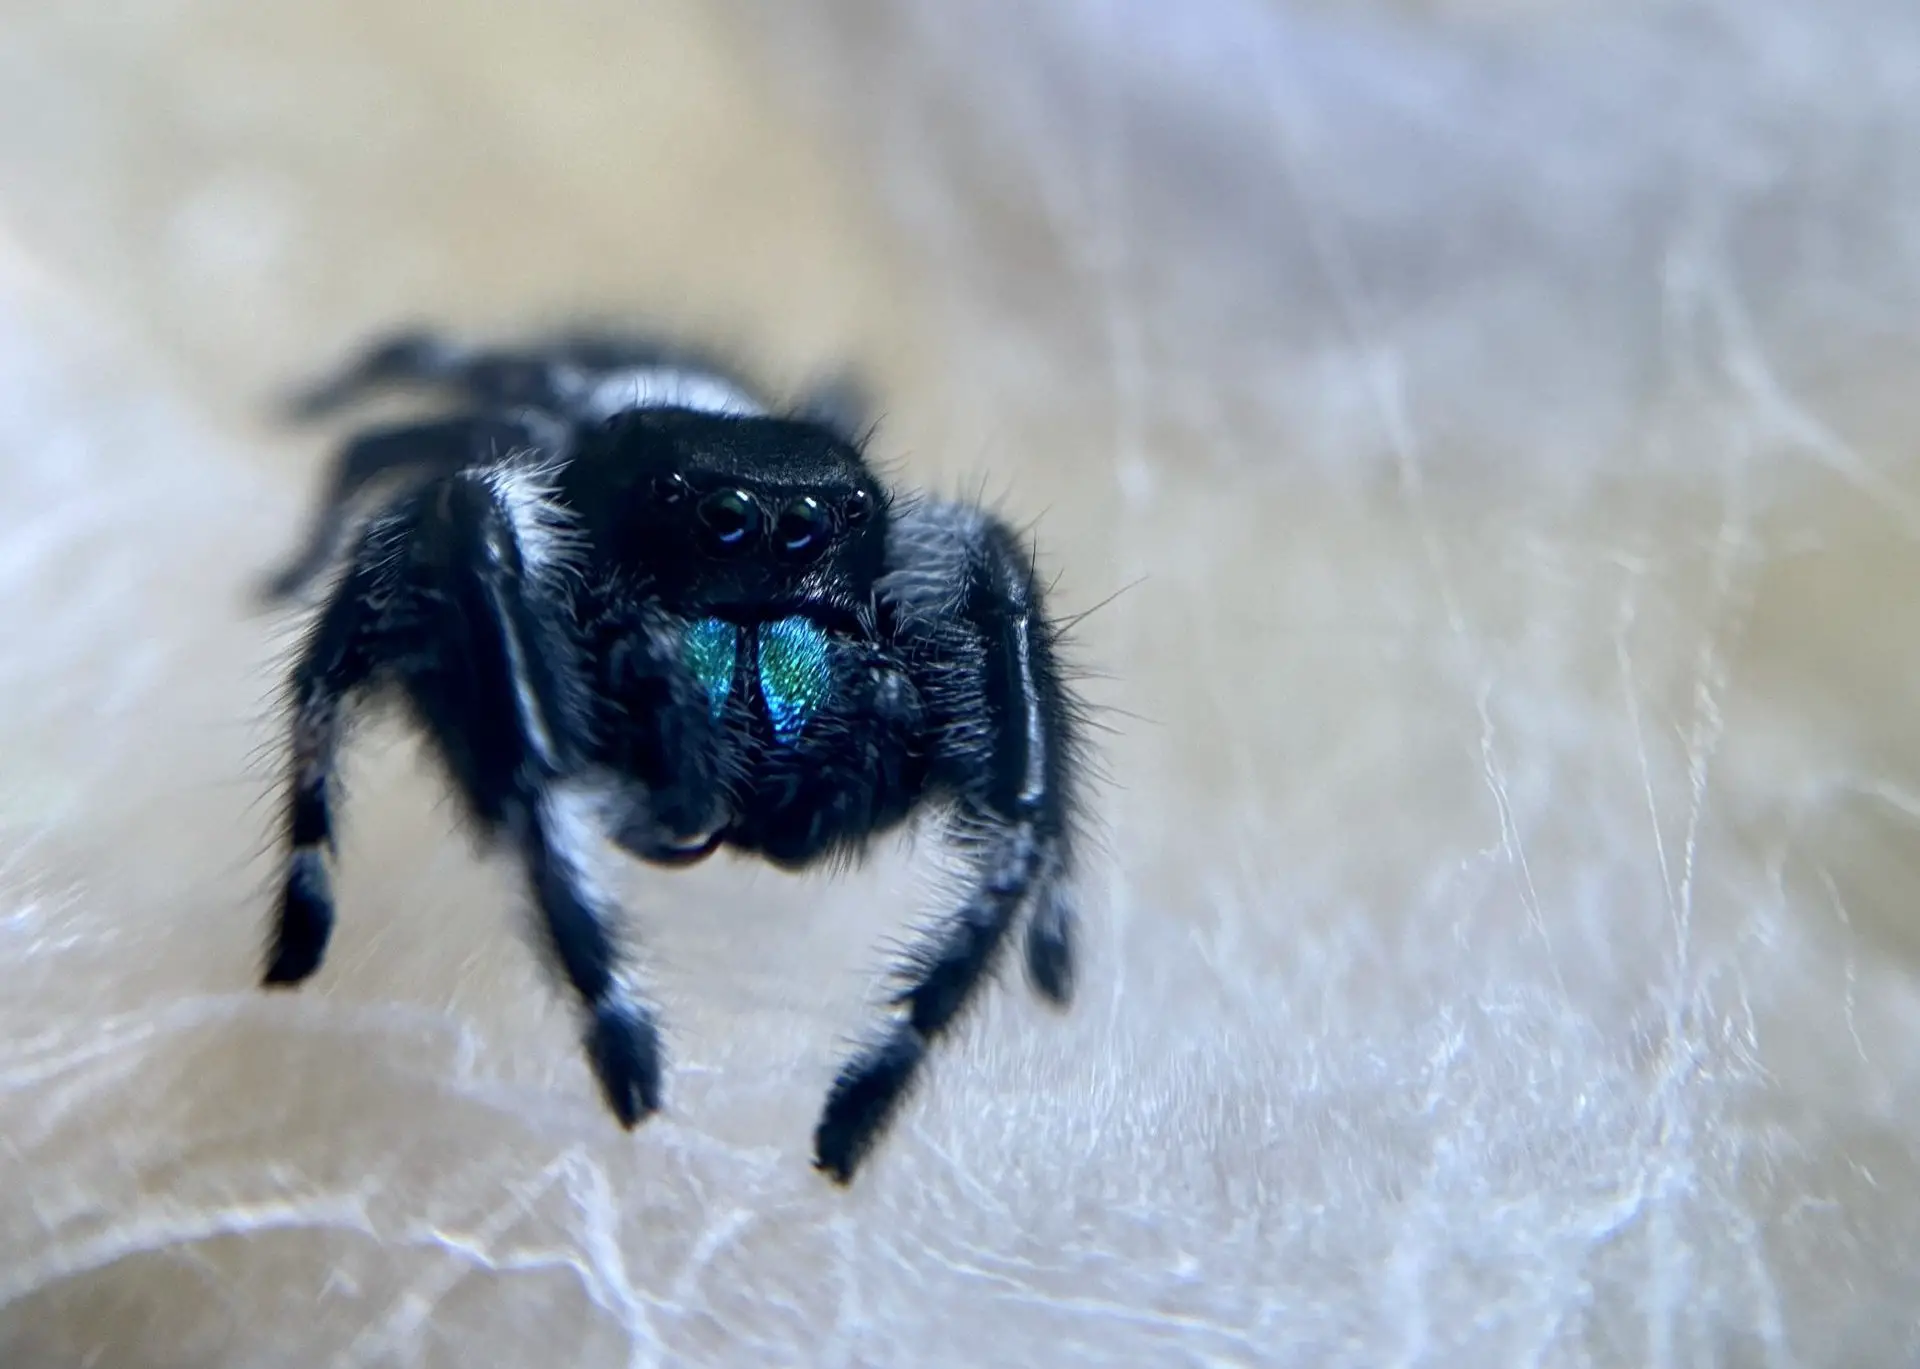 macro photograph of a male jumping spider